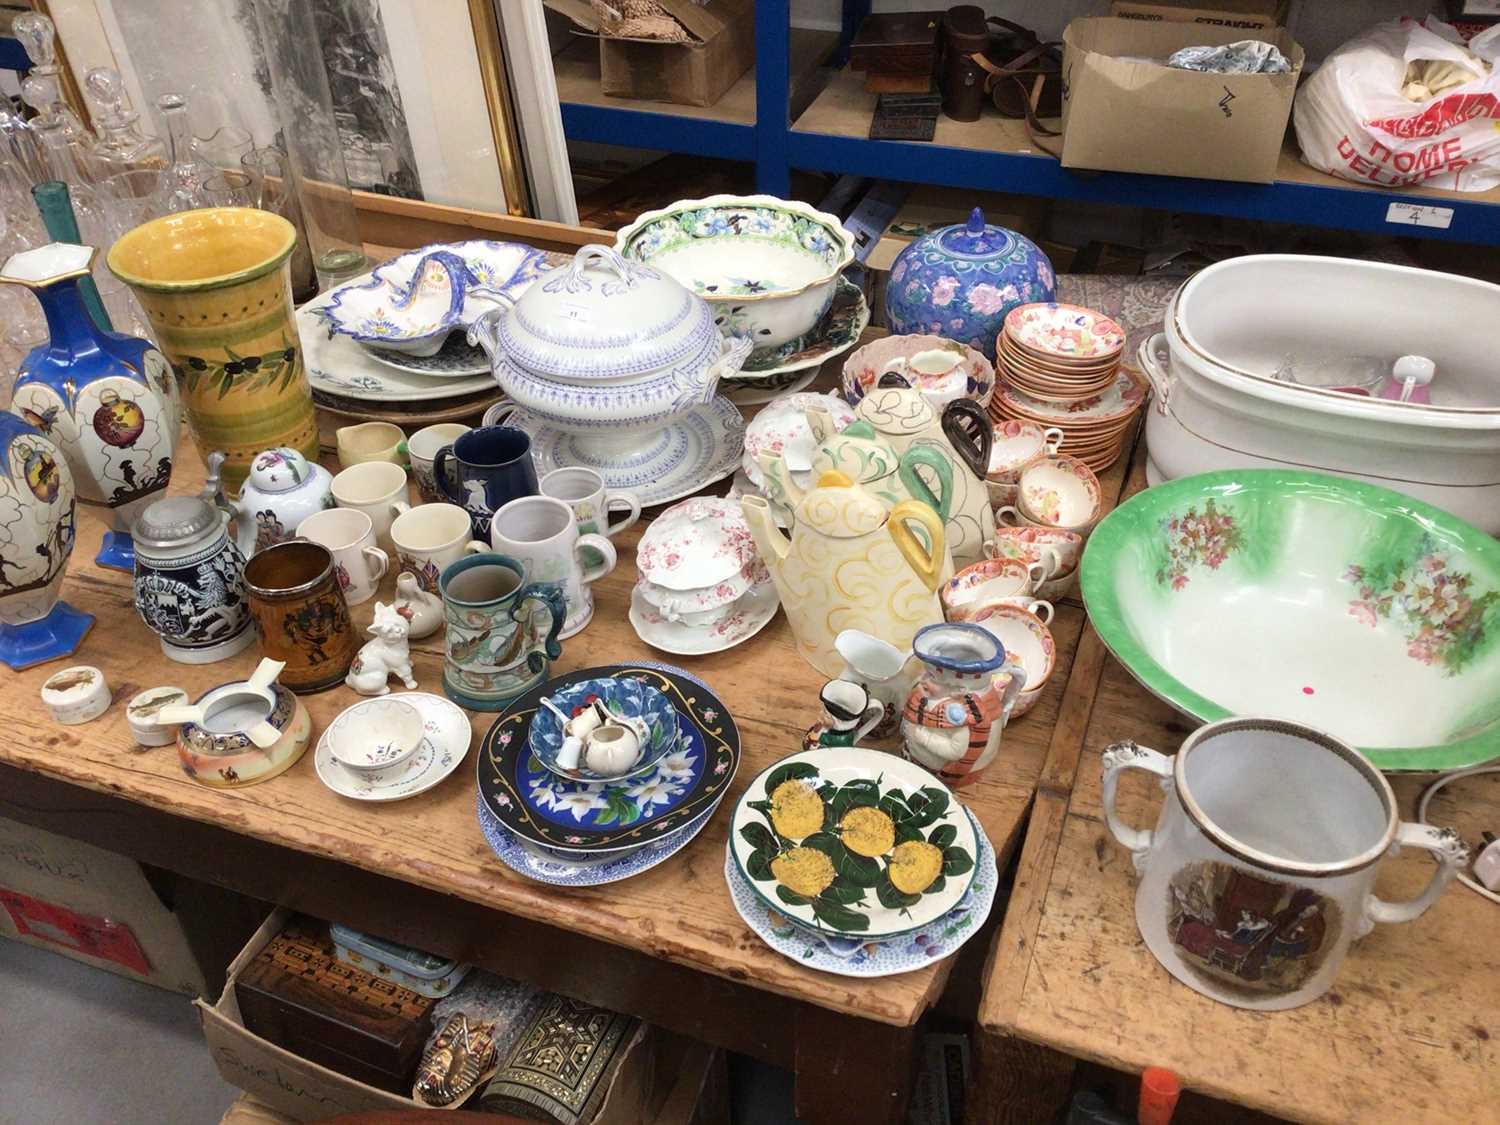 Lot 11 - Victorian and later ceramics, including tureens, teawares, Toby jugs, a Wemyss plate, etc